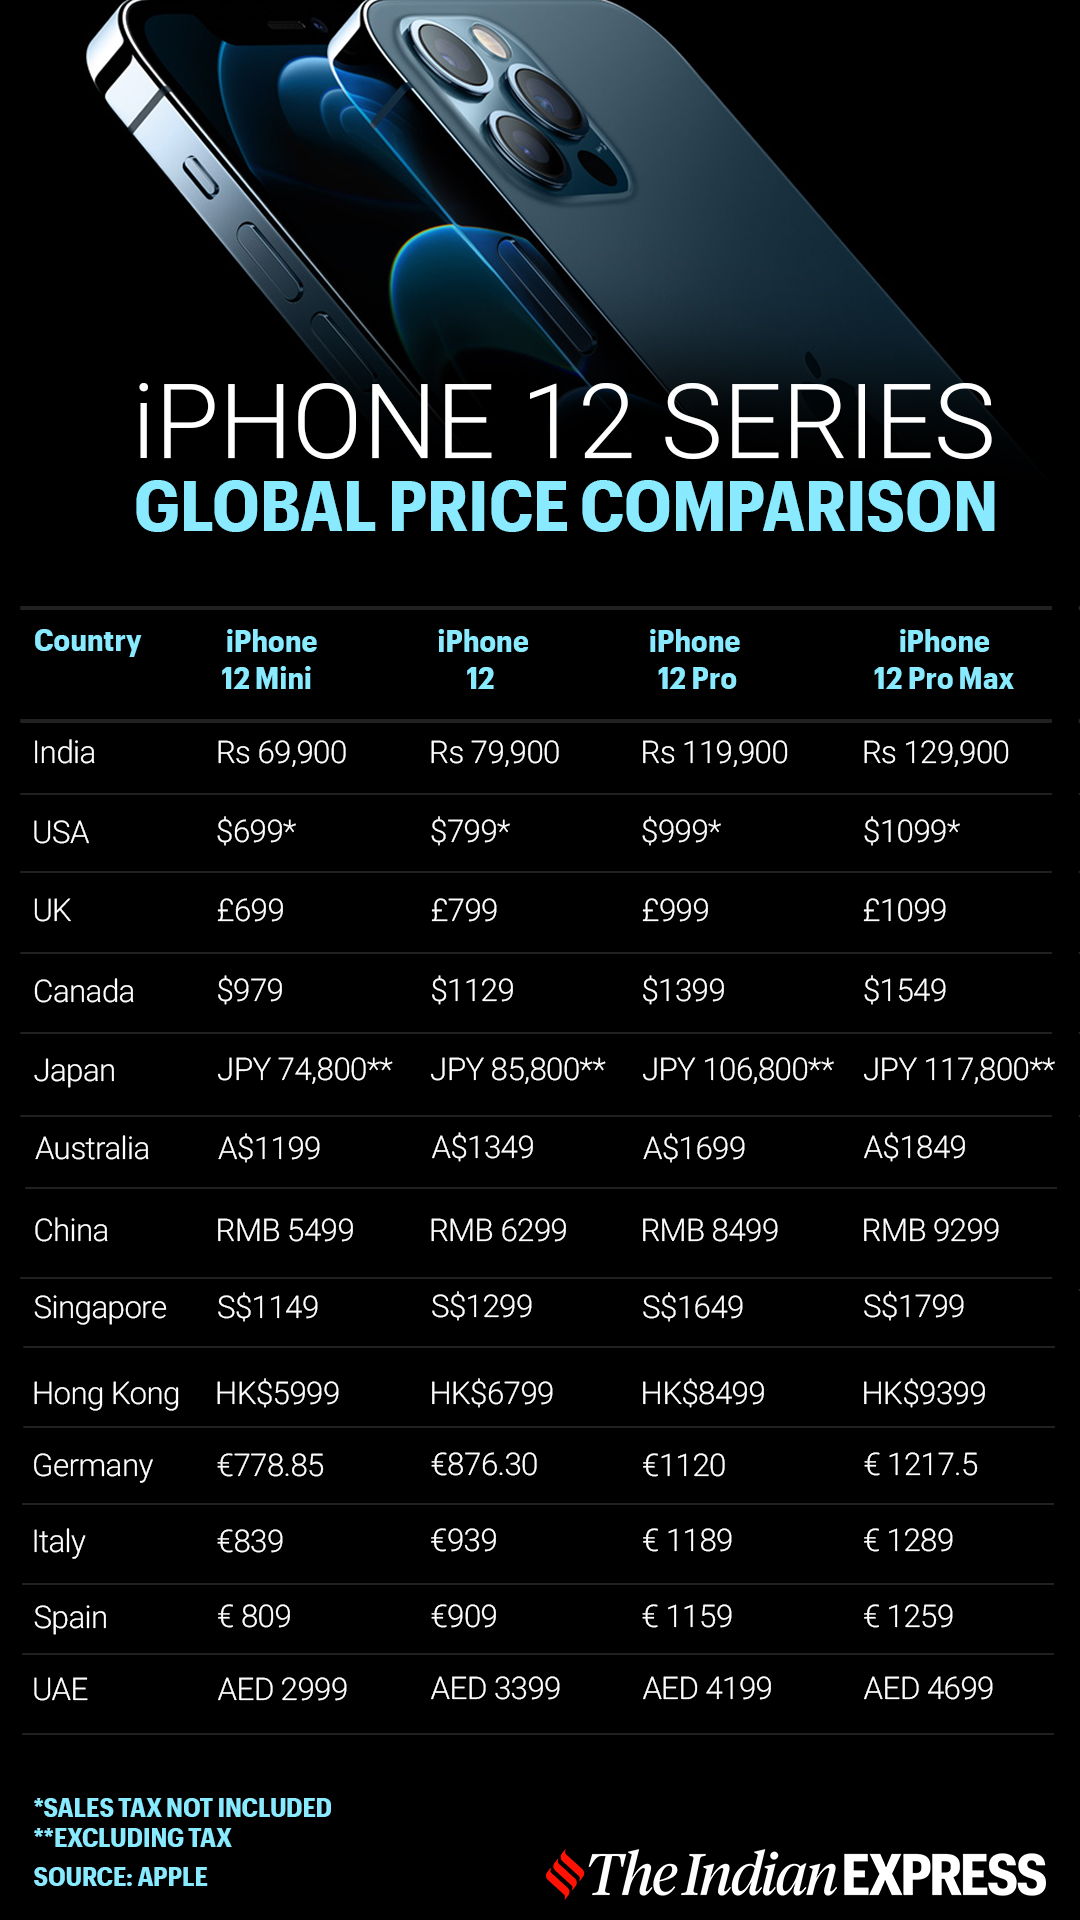 Guess which are the cheapest and most expensive places to buy iPhone 12